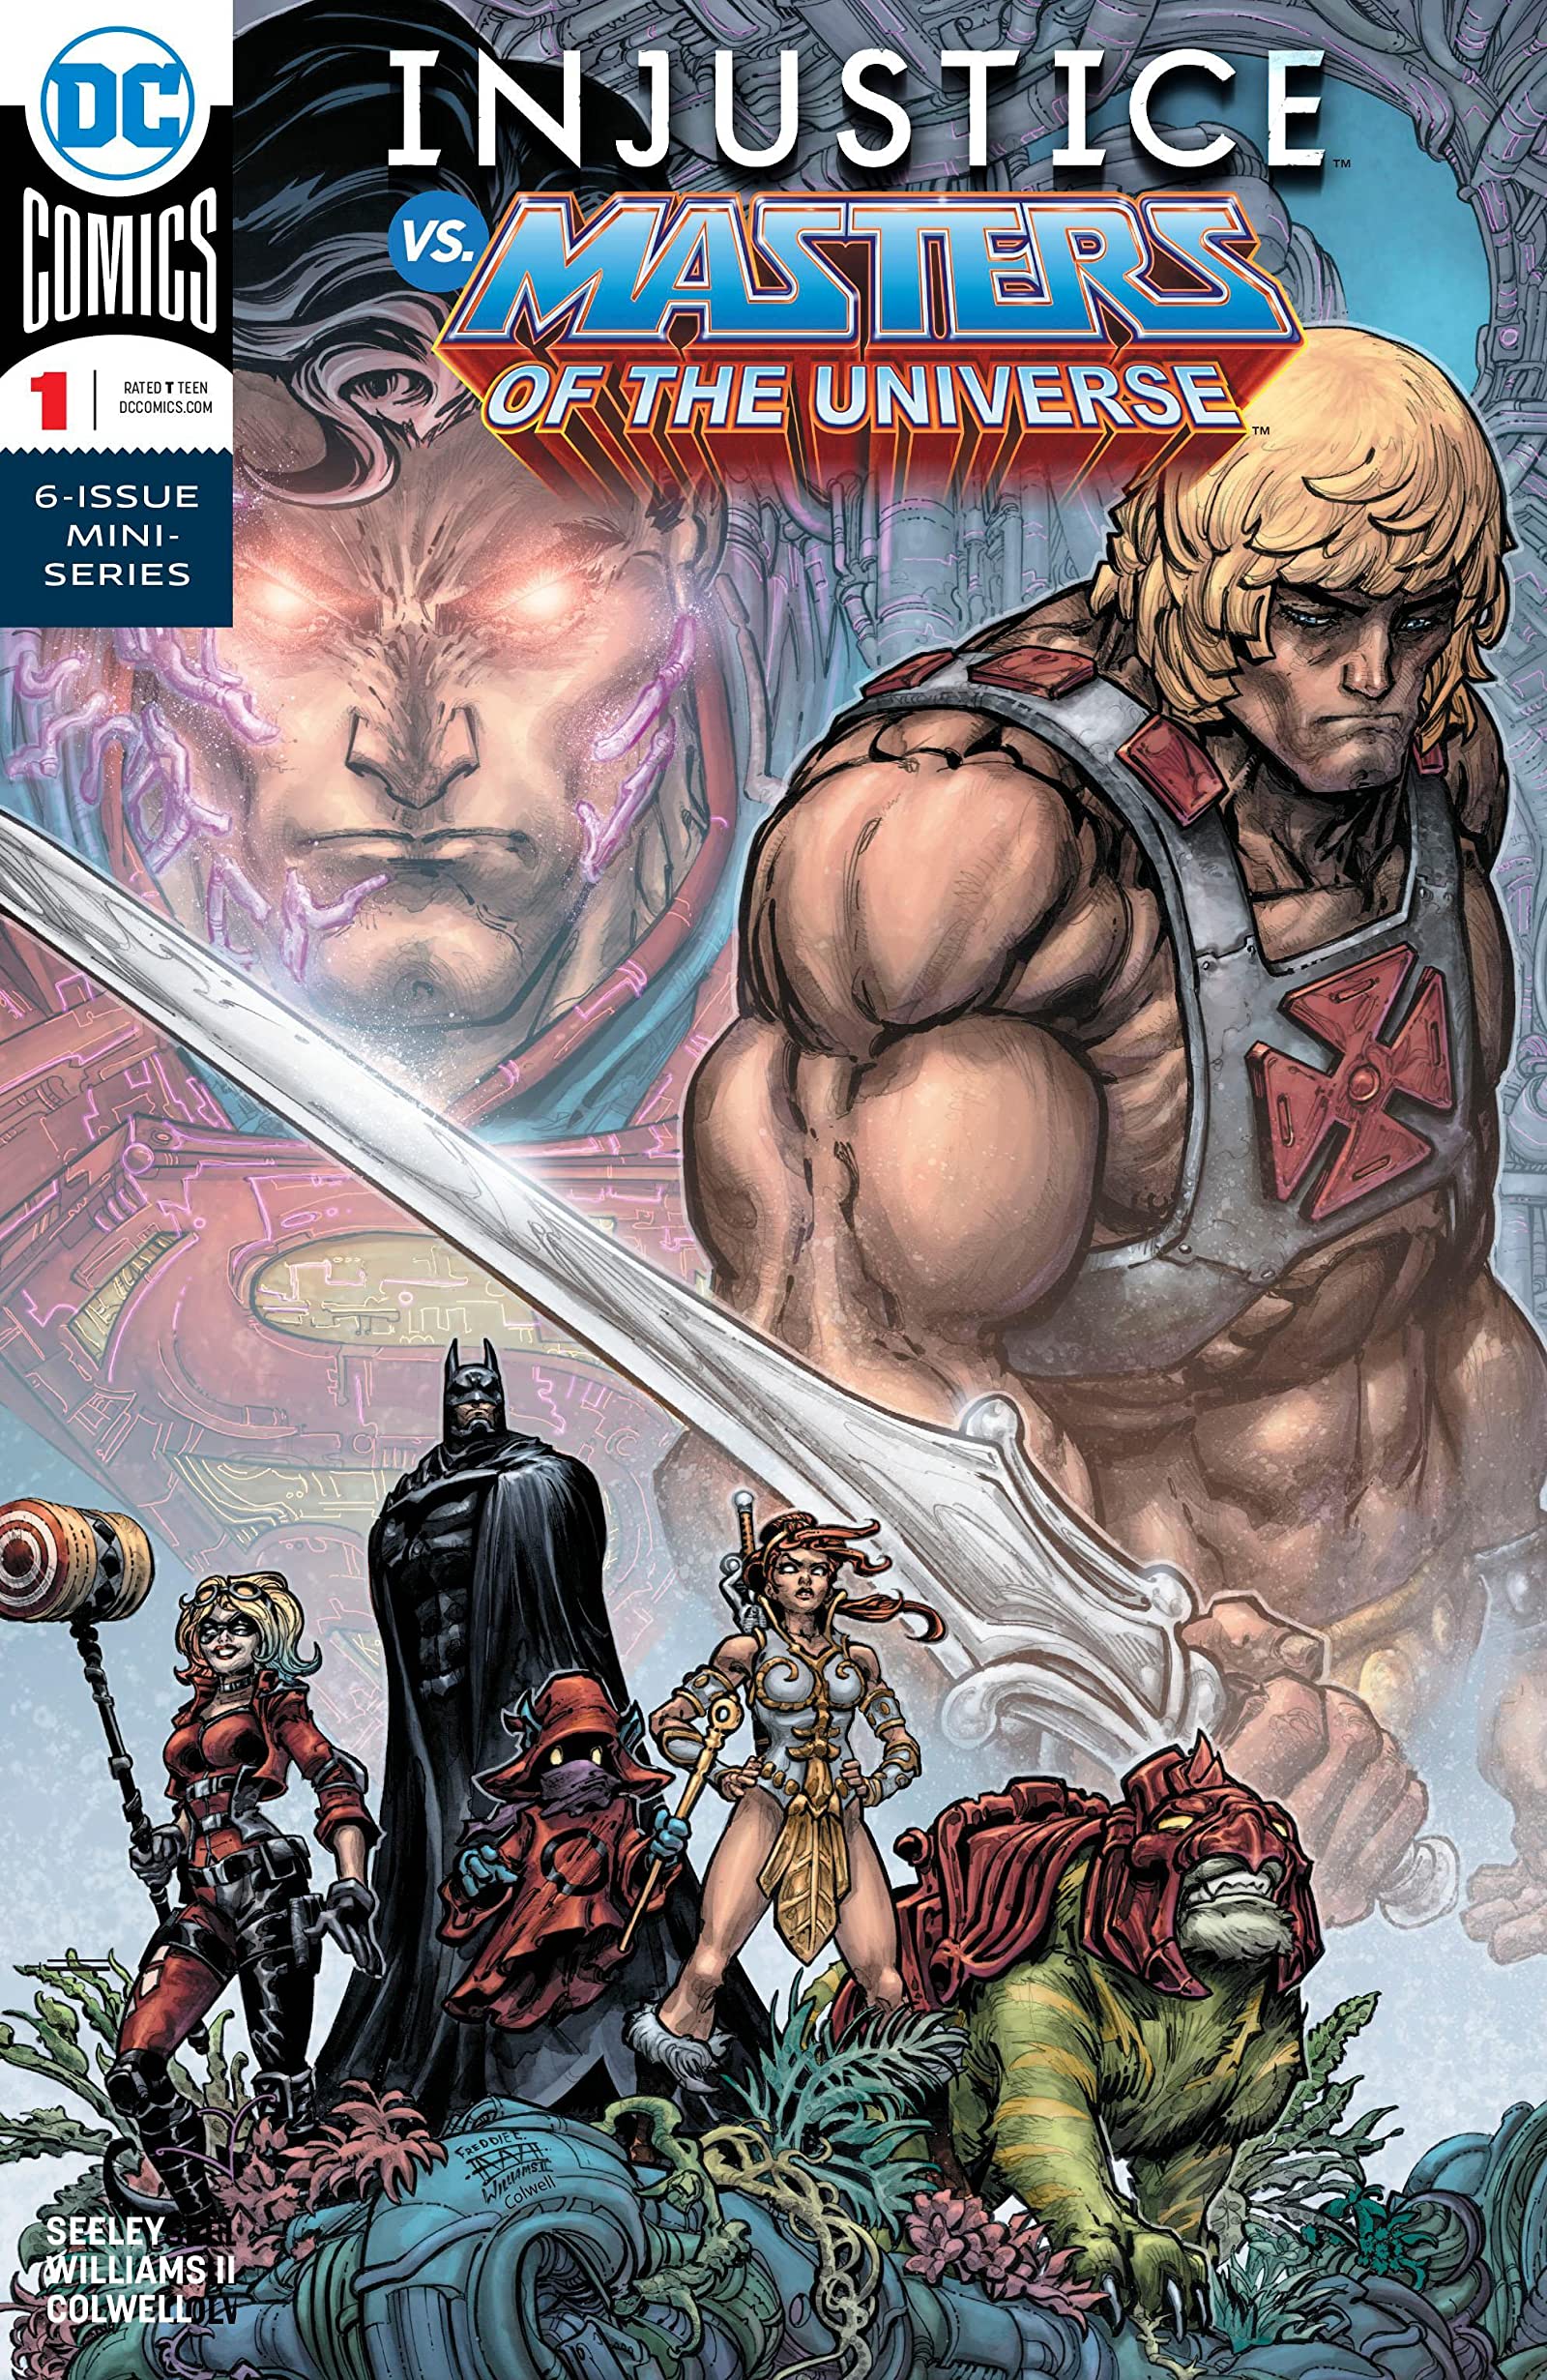 Injustice Vs Masters of the Universe #1 (Of 6)